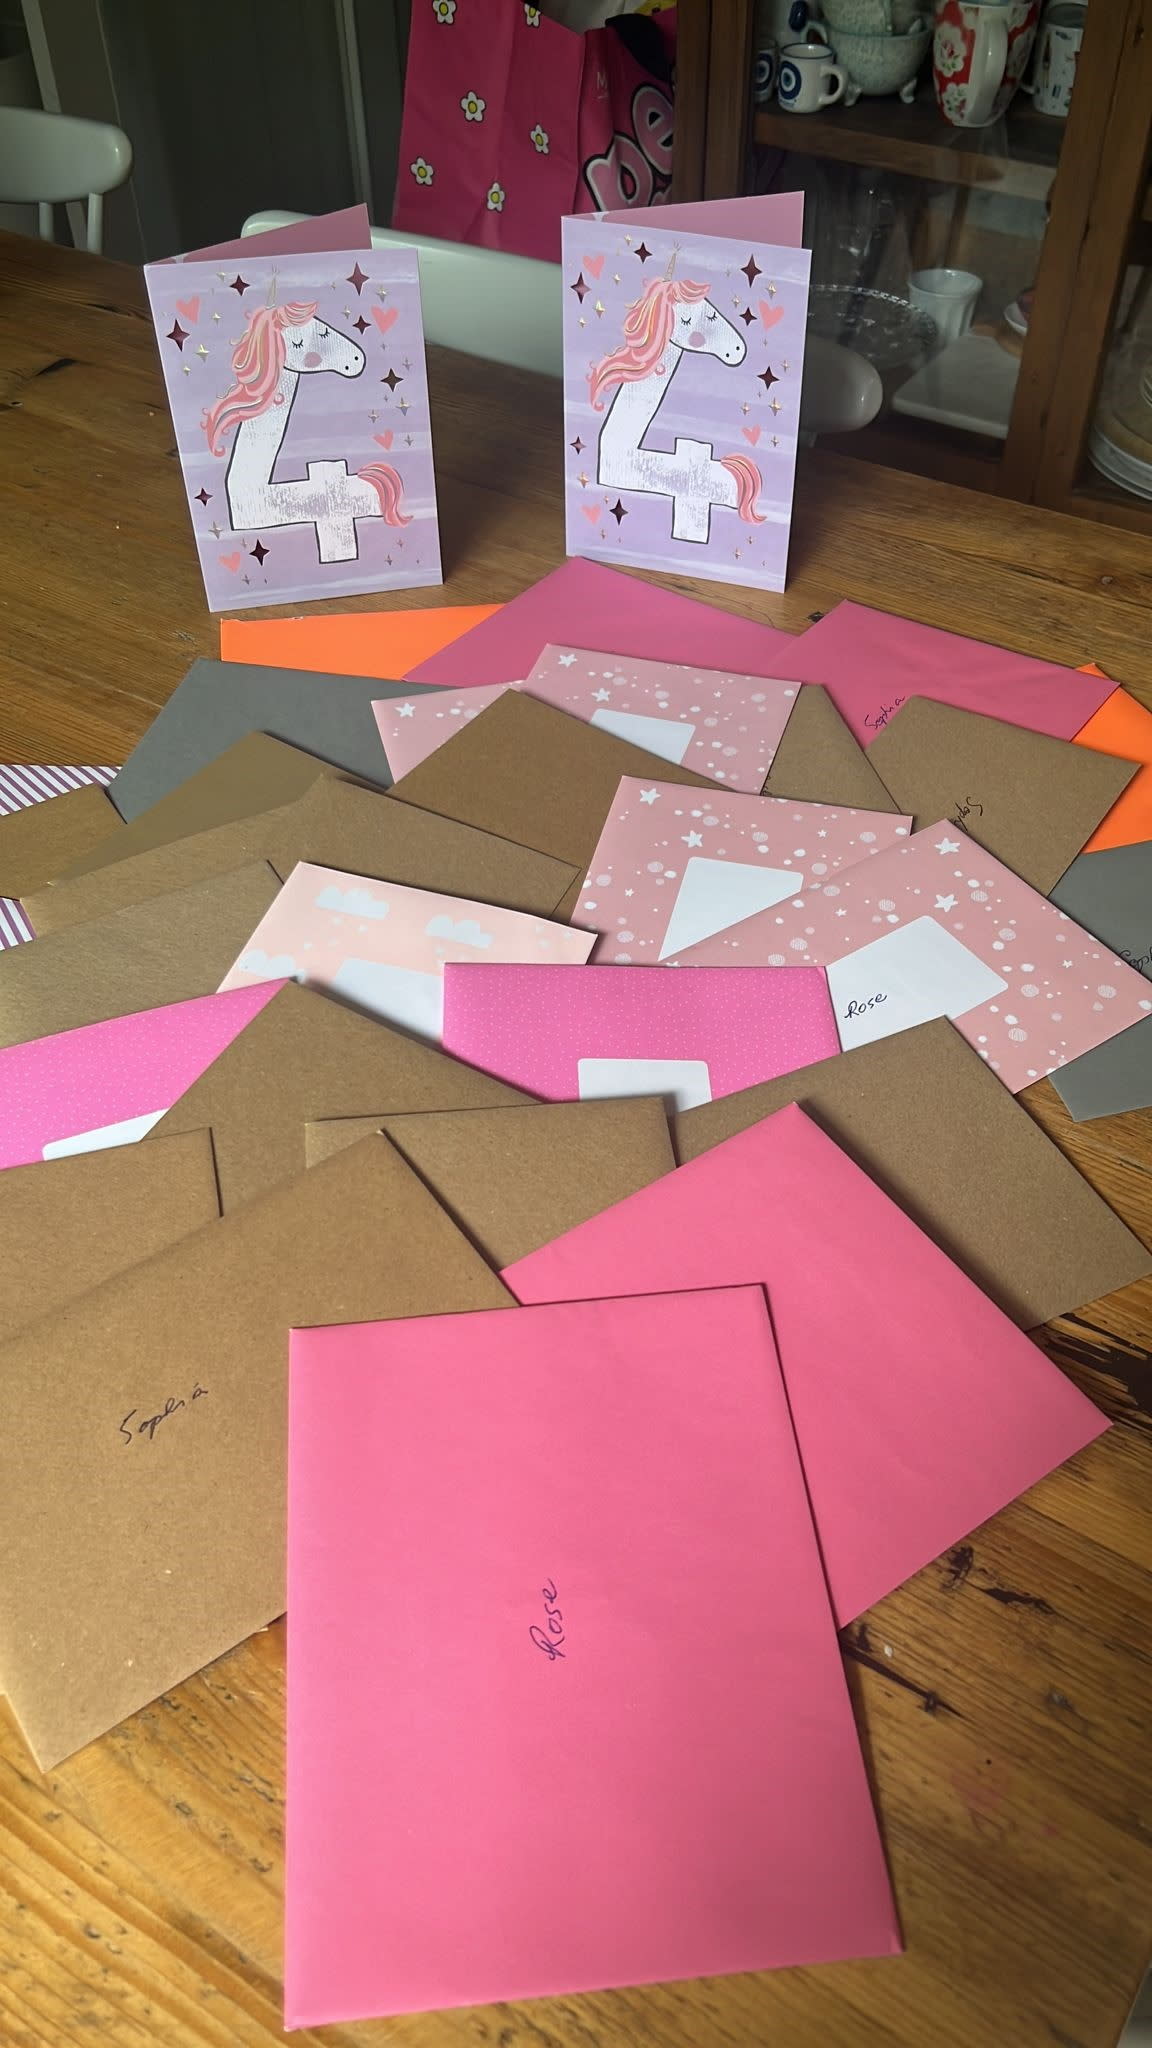 Nick Keenan's cards to his daughters. (Brain Tumour Research/SWNS)